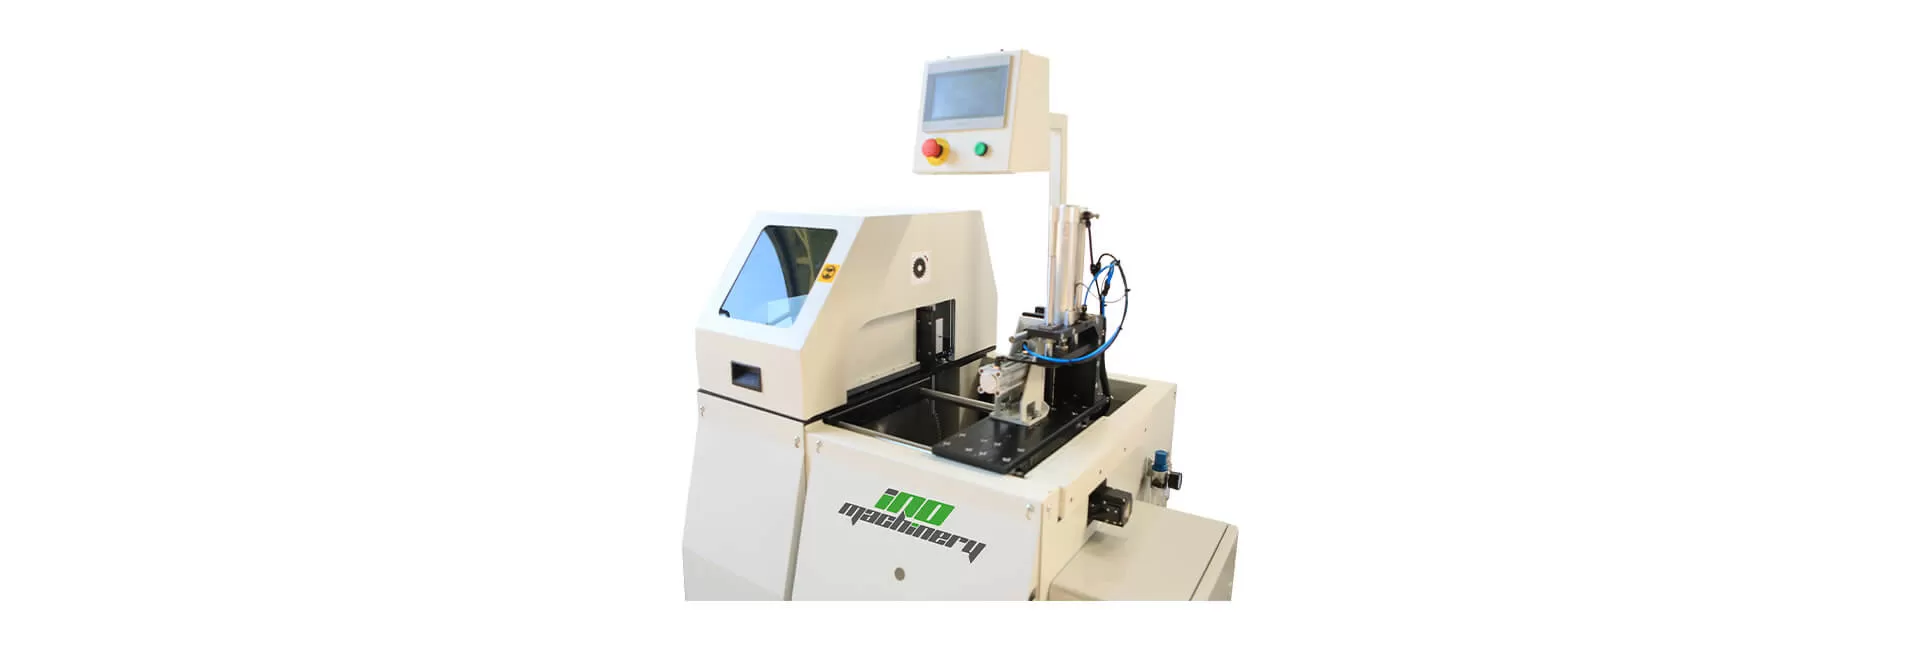 AS 489 S Automatic Cutting Saw with Servo Feed